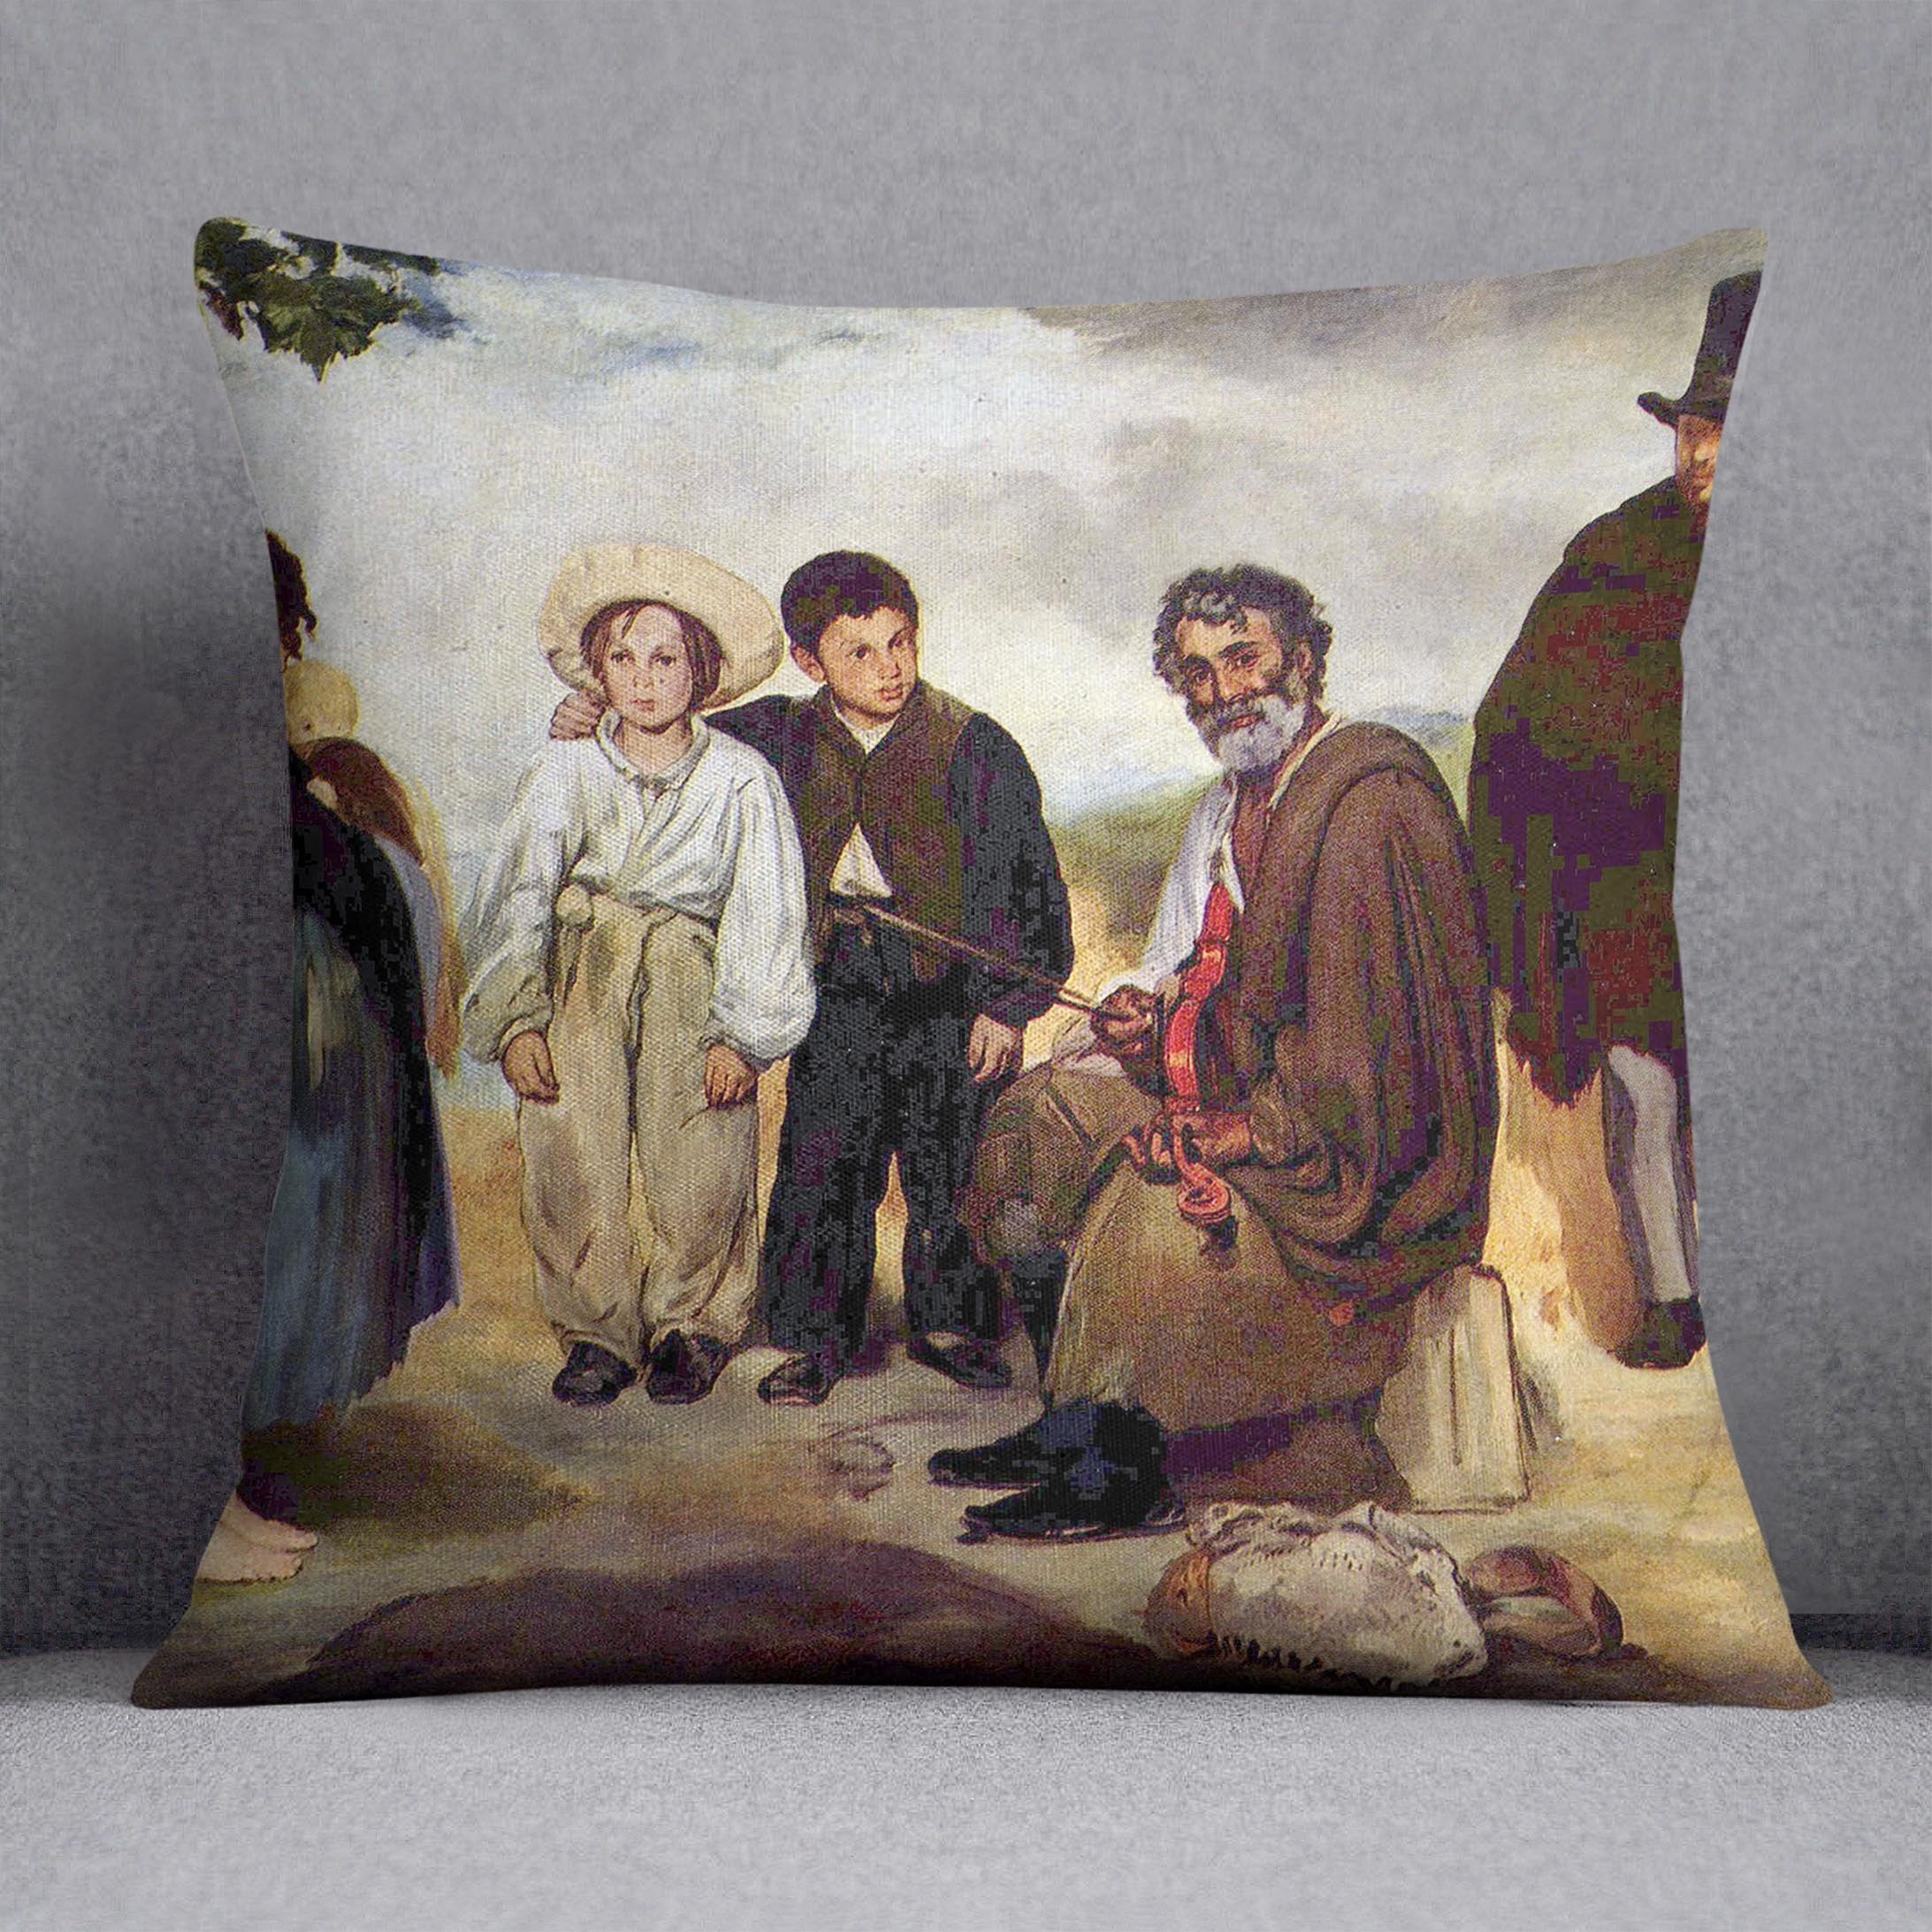 The old musician by Manet Throw Pillow